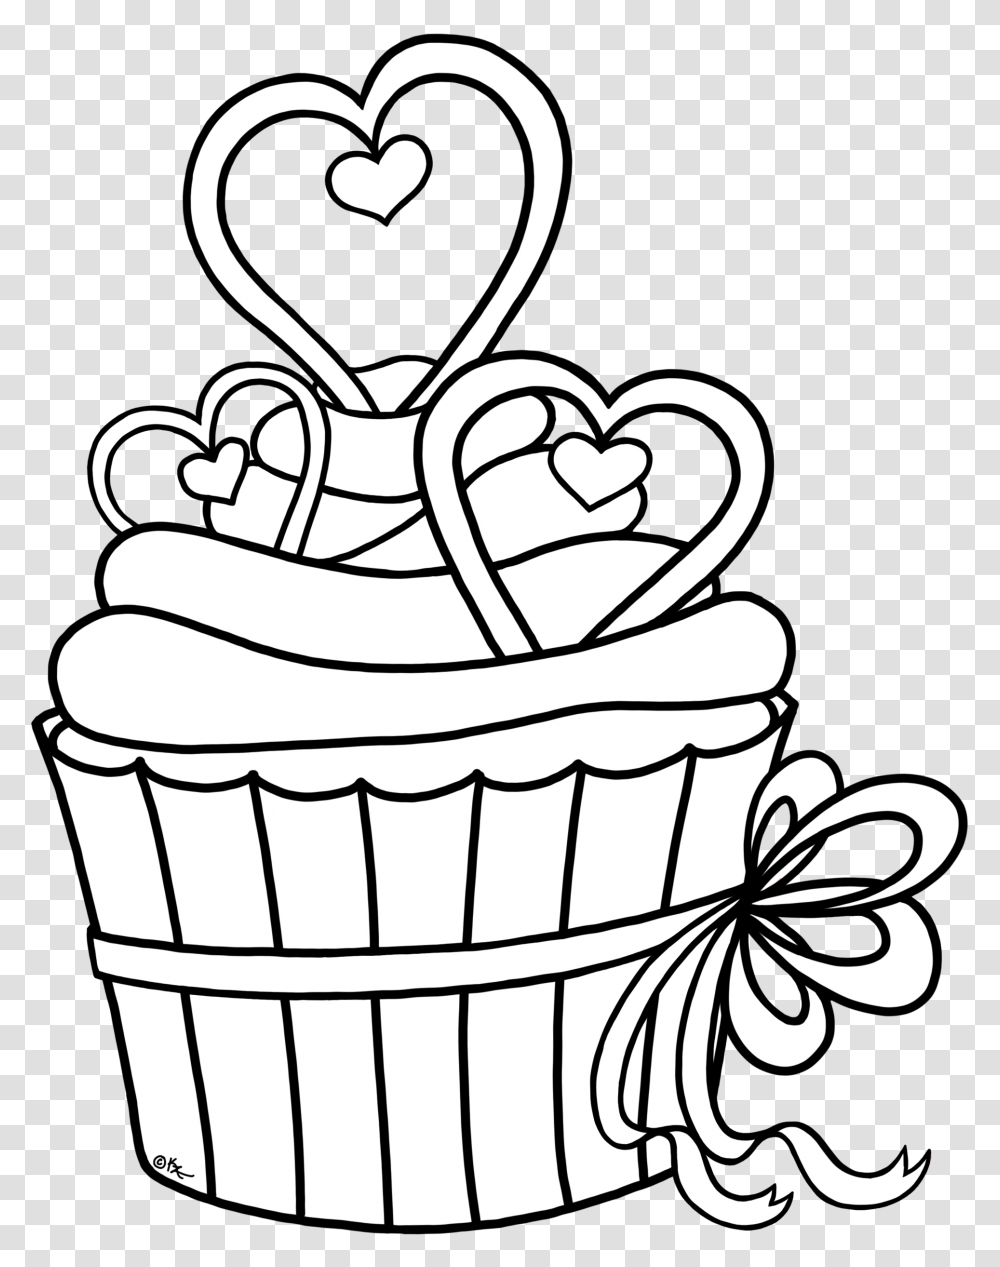 Download Cupcake Outline Clipart Heart Cupcake Coloring Heart Cupcake Coloring Pages, Cream, Dessert, Food, Creme Transparent Png